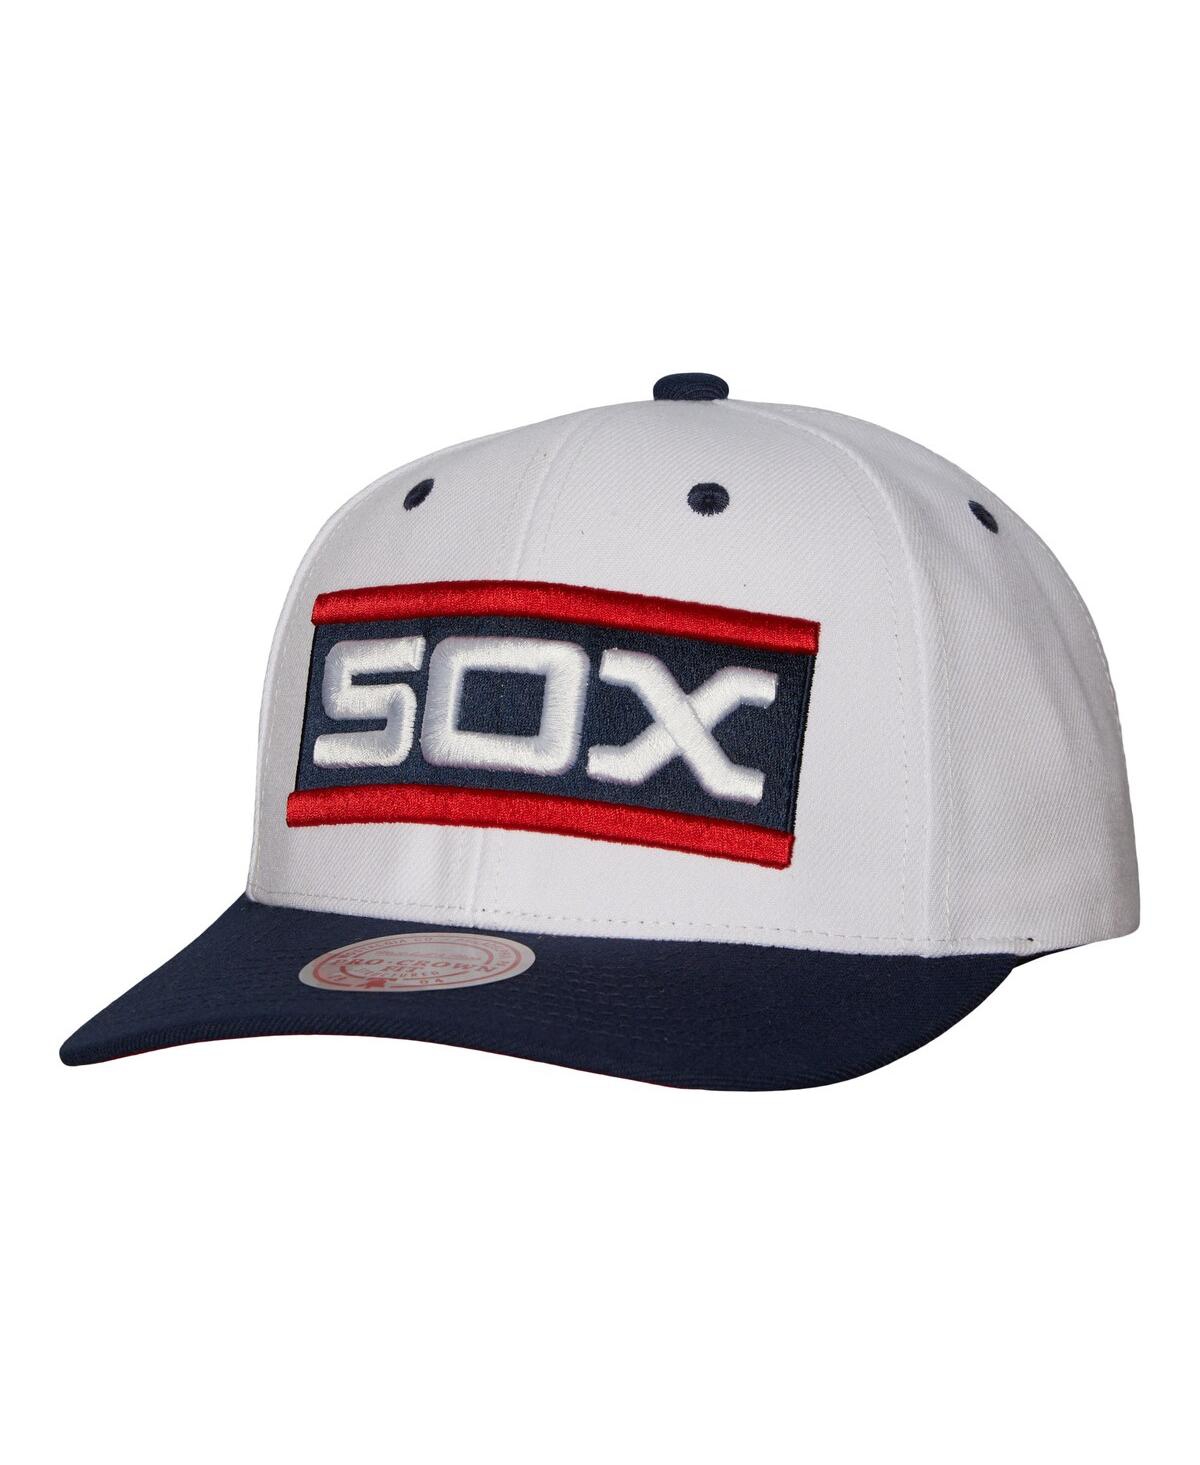 Mitchell & Ness Men's  White Chicago White Sox Cooperstown Collection Pro Crown Snapback Hat In White/black